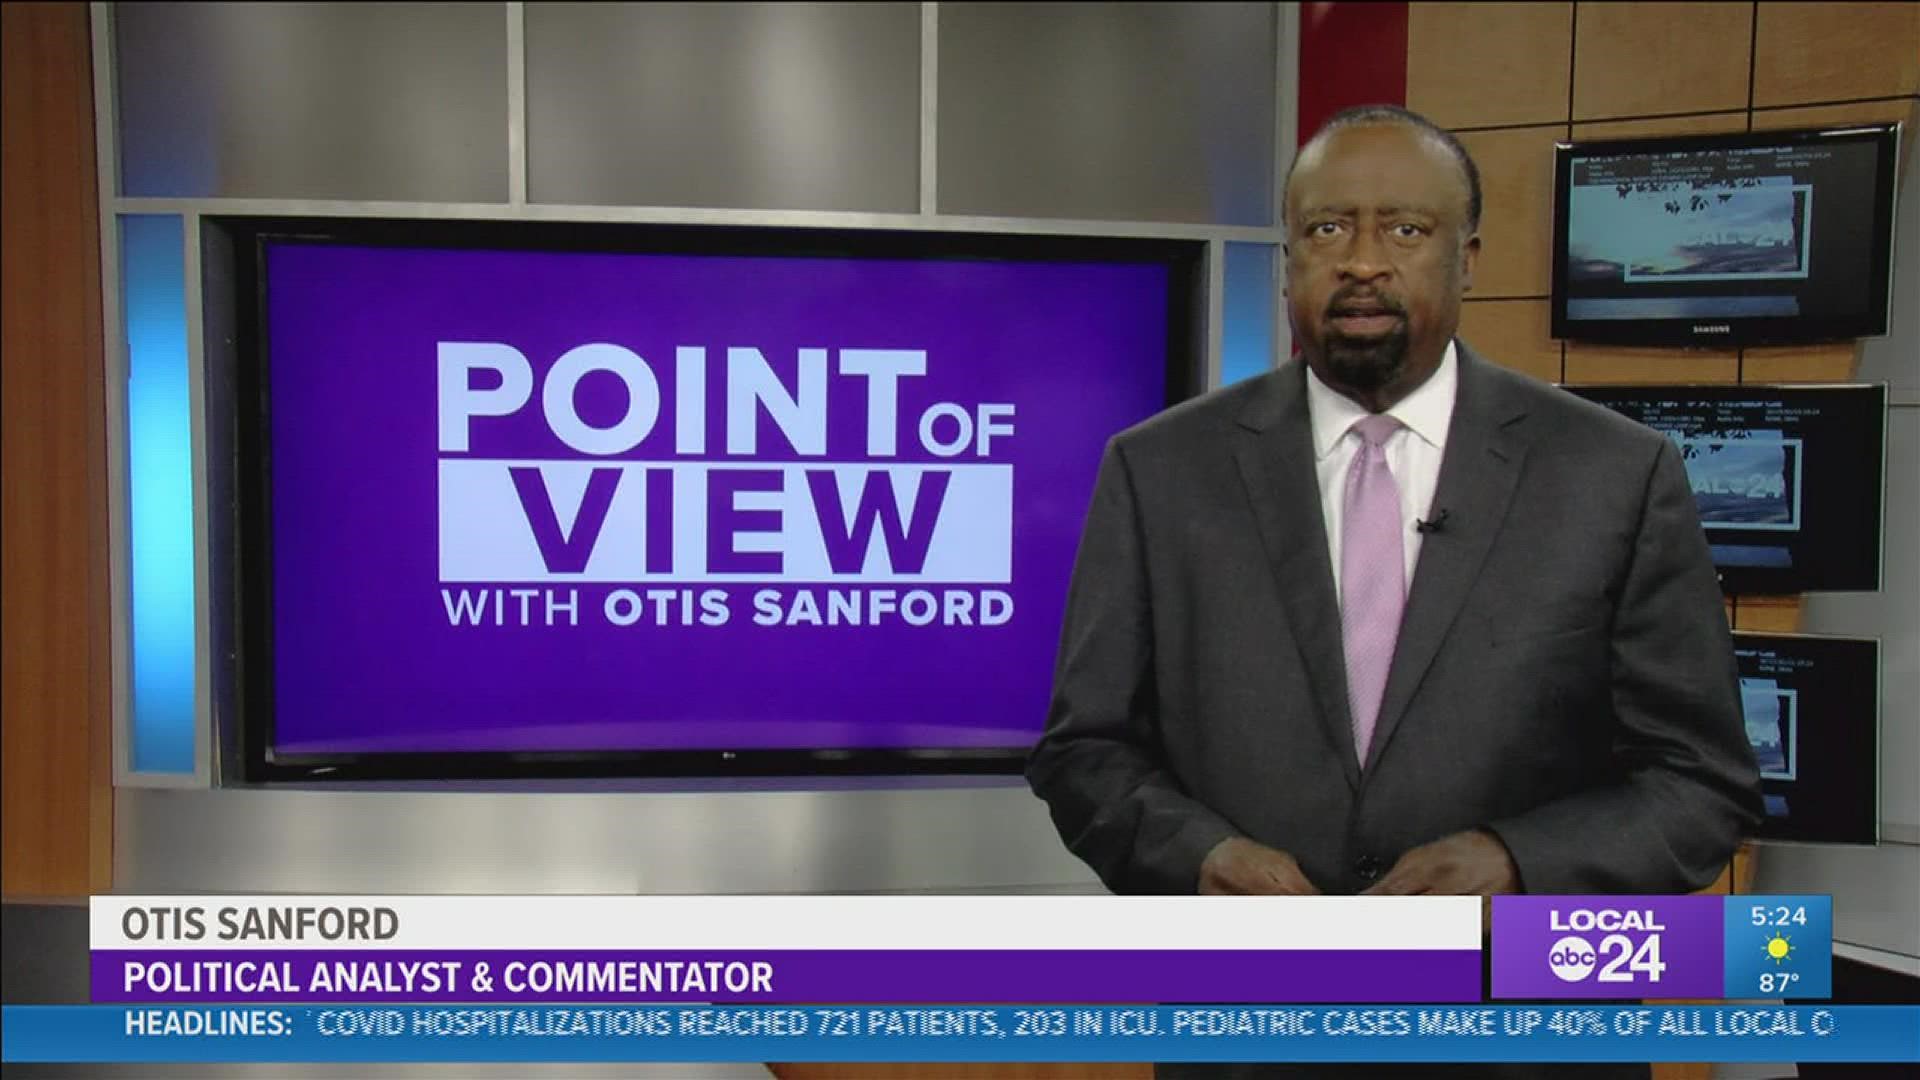 Political analyst and commentator Otis Sanford shared his point of view on this year’s National Civil Rights Museum Freedom Awards.